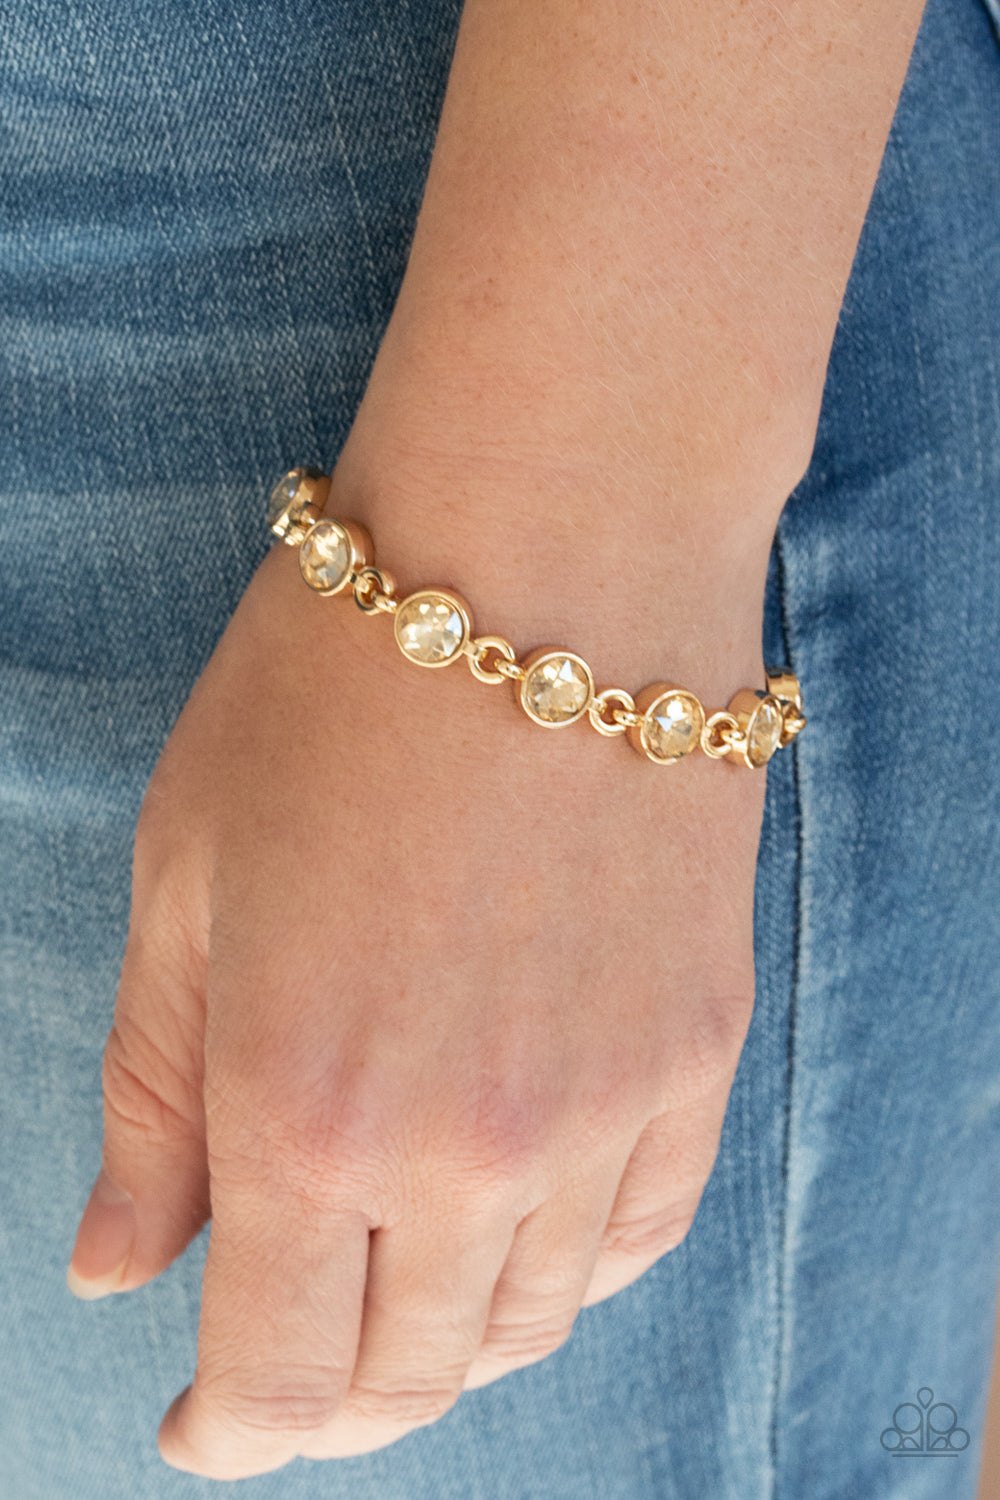 First In Fashion Show - Gold Fashion Bracelet - Paparazzi Accessories - Golden rhinestone encrusted gold frames delicately link around the wrist, creating a timeless centerpiece. Features an adjustable clasp closure. Sold as one individual bracelet.